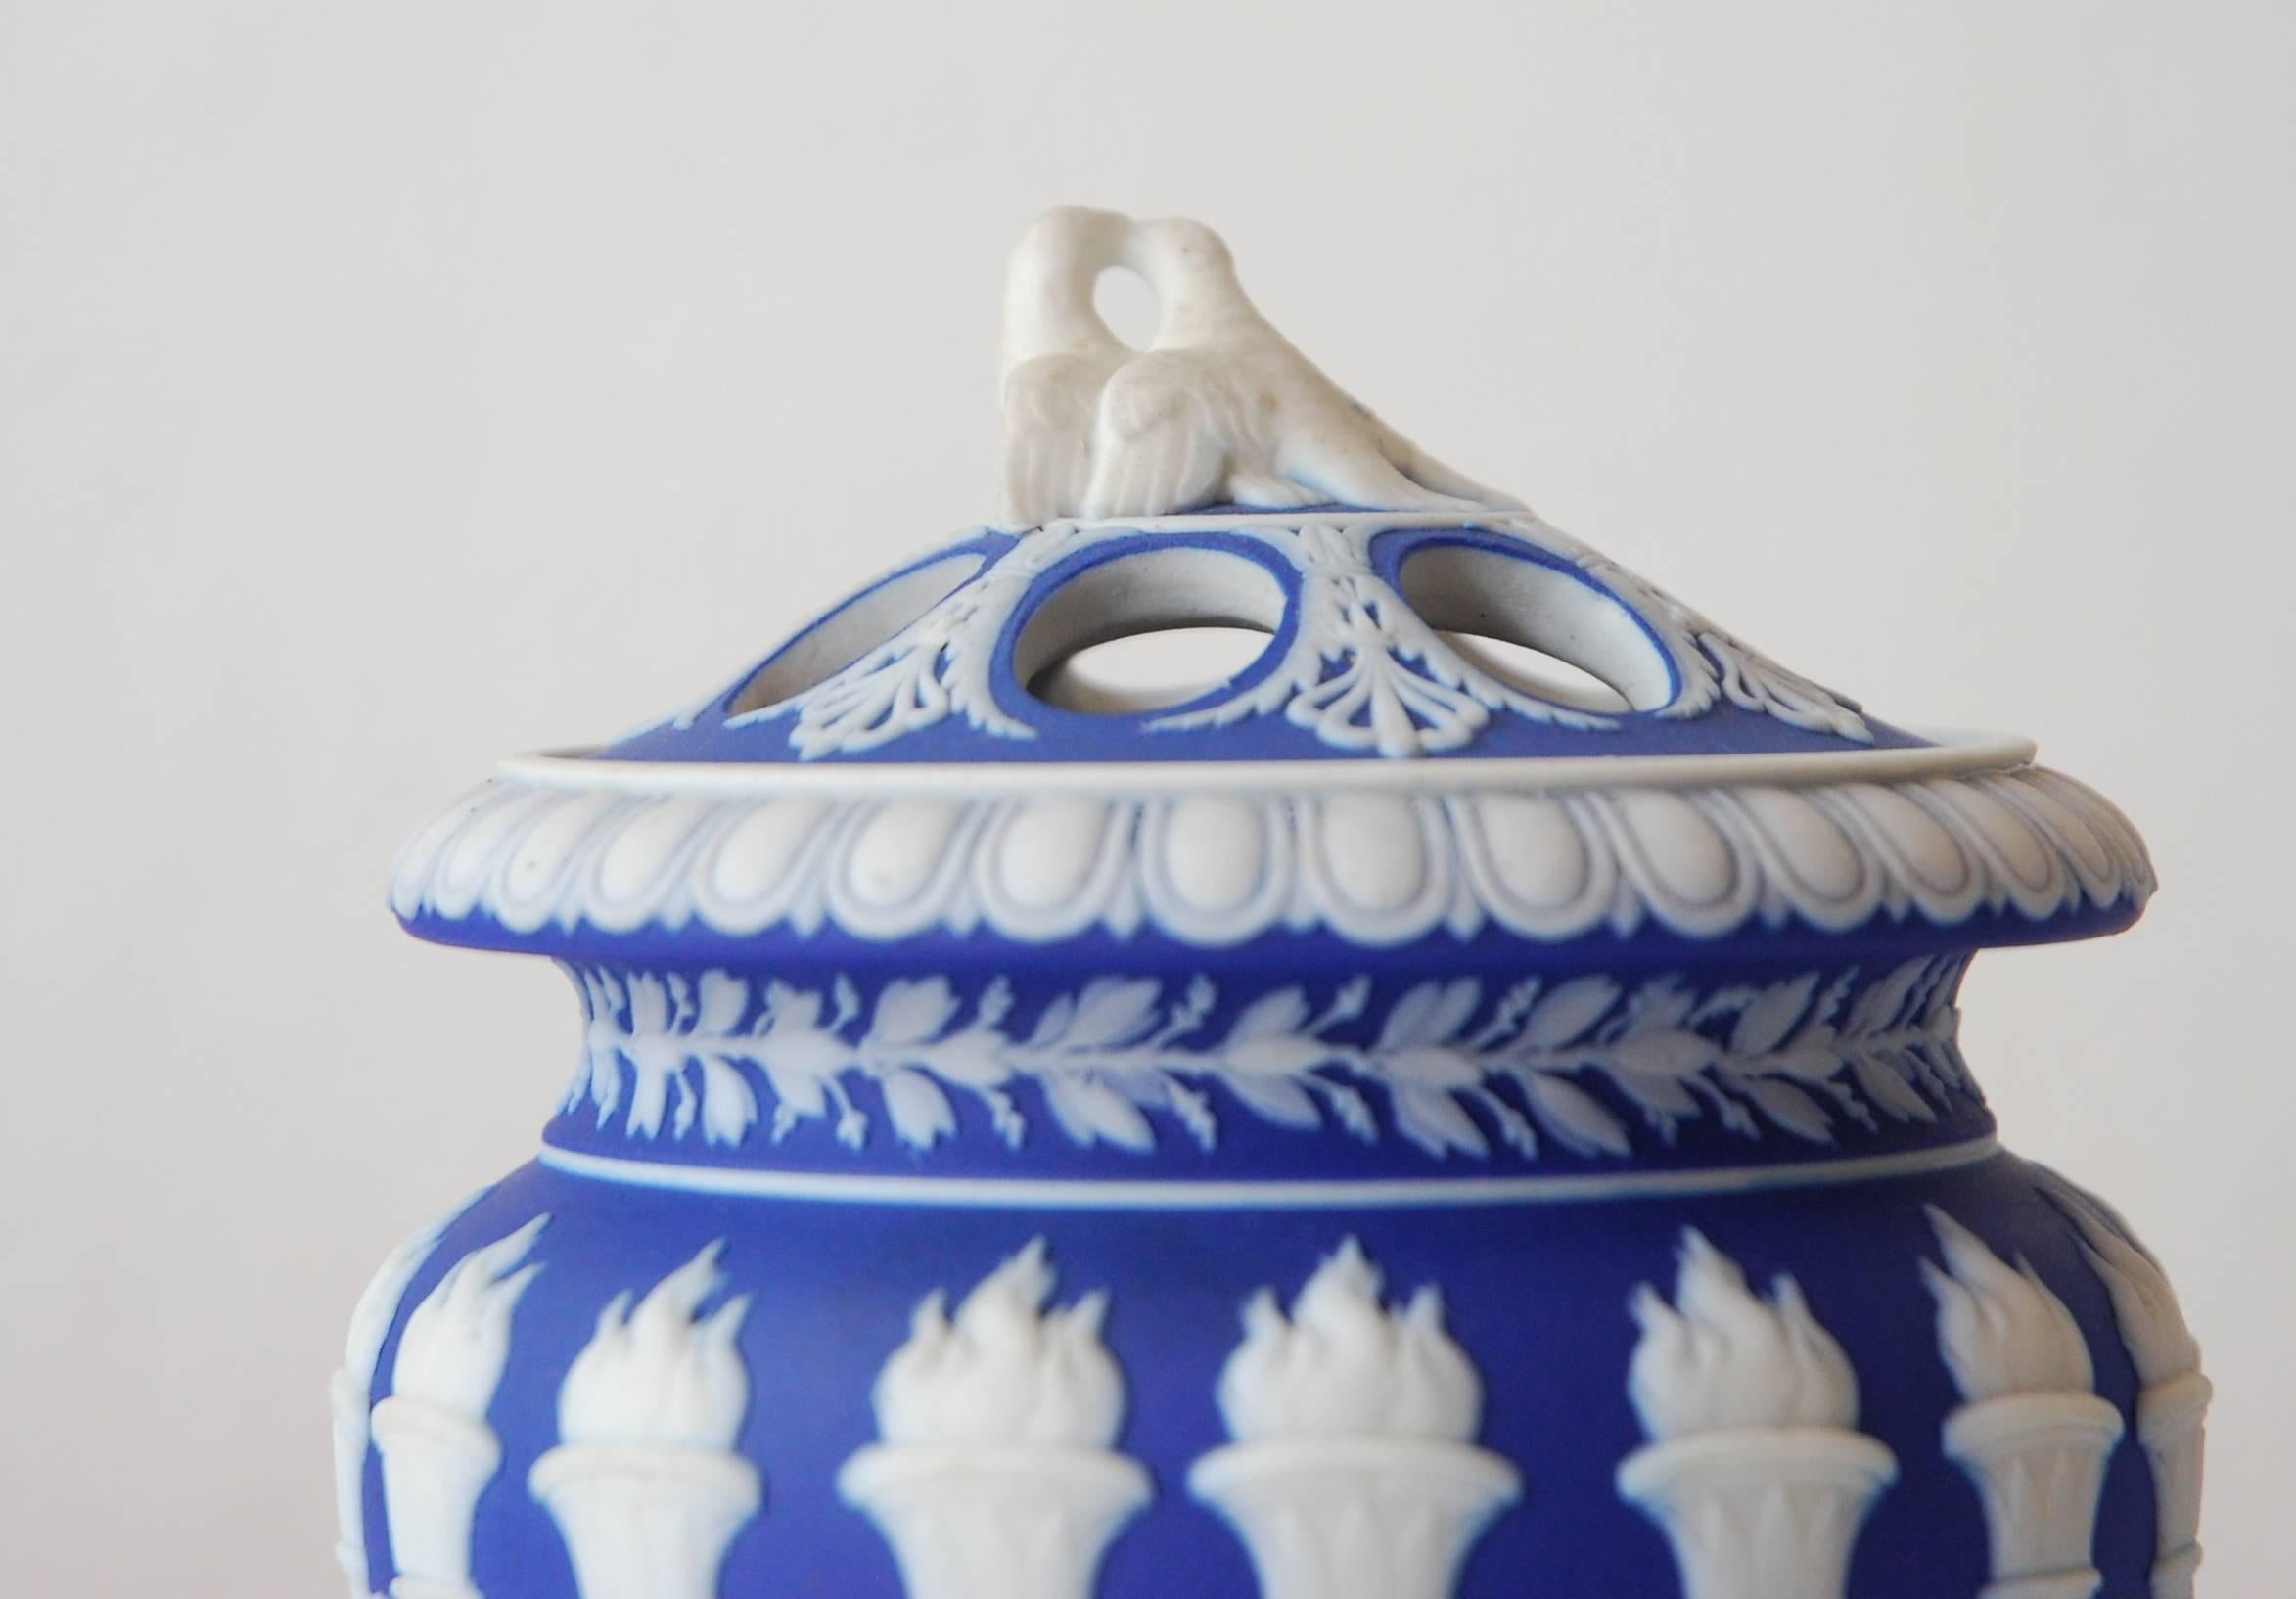 A rare pair of ‘Torch’ vases in cobalt jasper dip, complete with covers featuring a pair of love-birds.

The jasper dip over white stoneware, a typical combination during this period, gives a singular brilliant blue to the ground color.